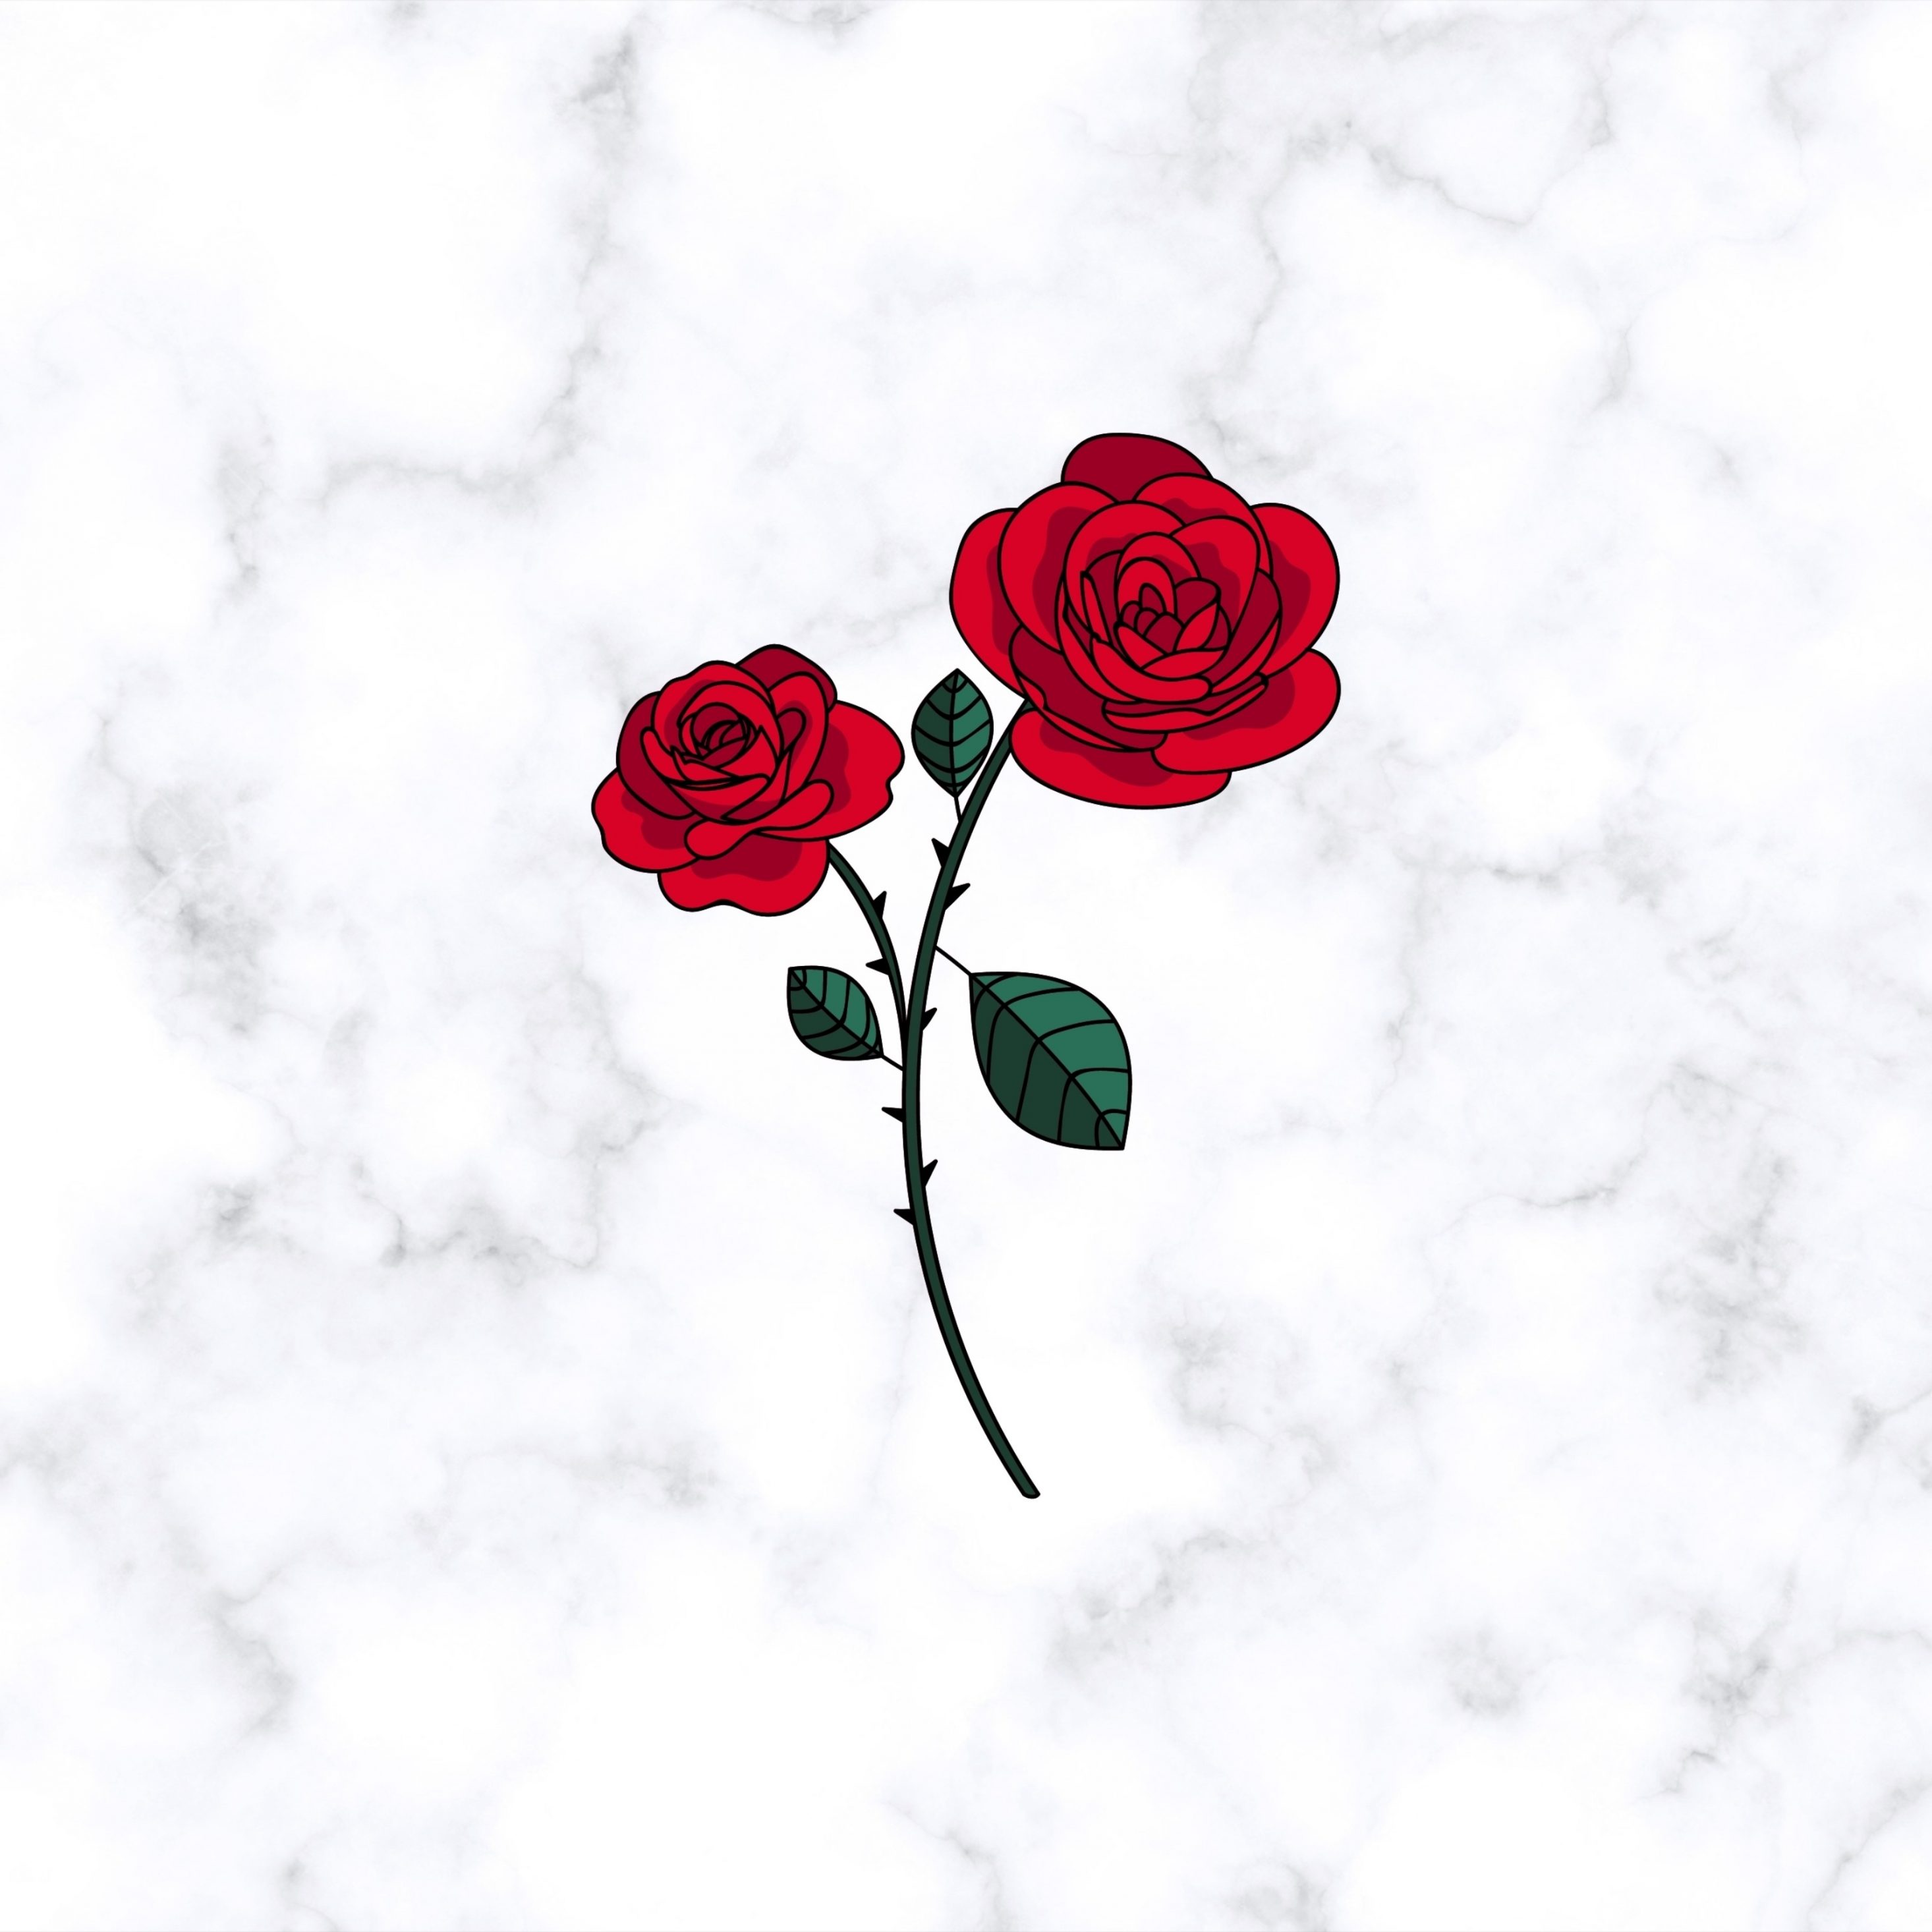 Red Rose with Water Droplets Live Wallpaper - 4K Stunning Visuals - free  download